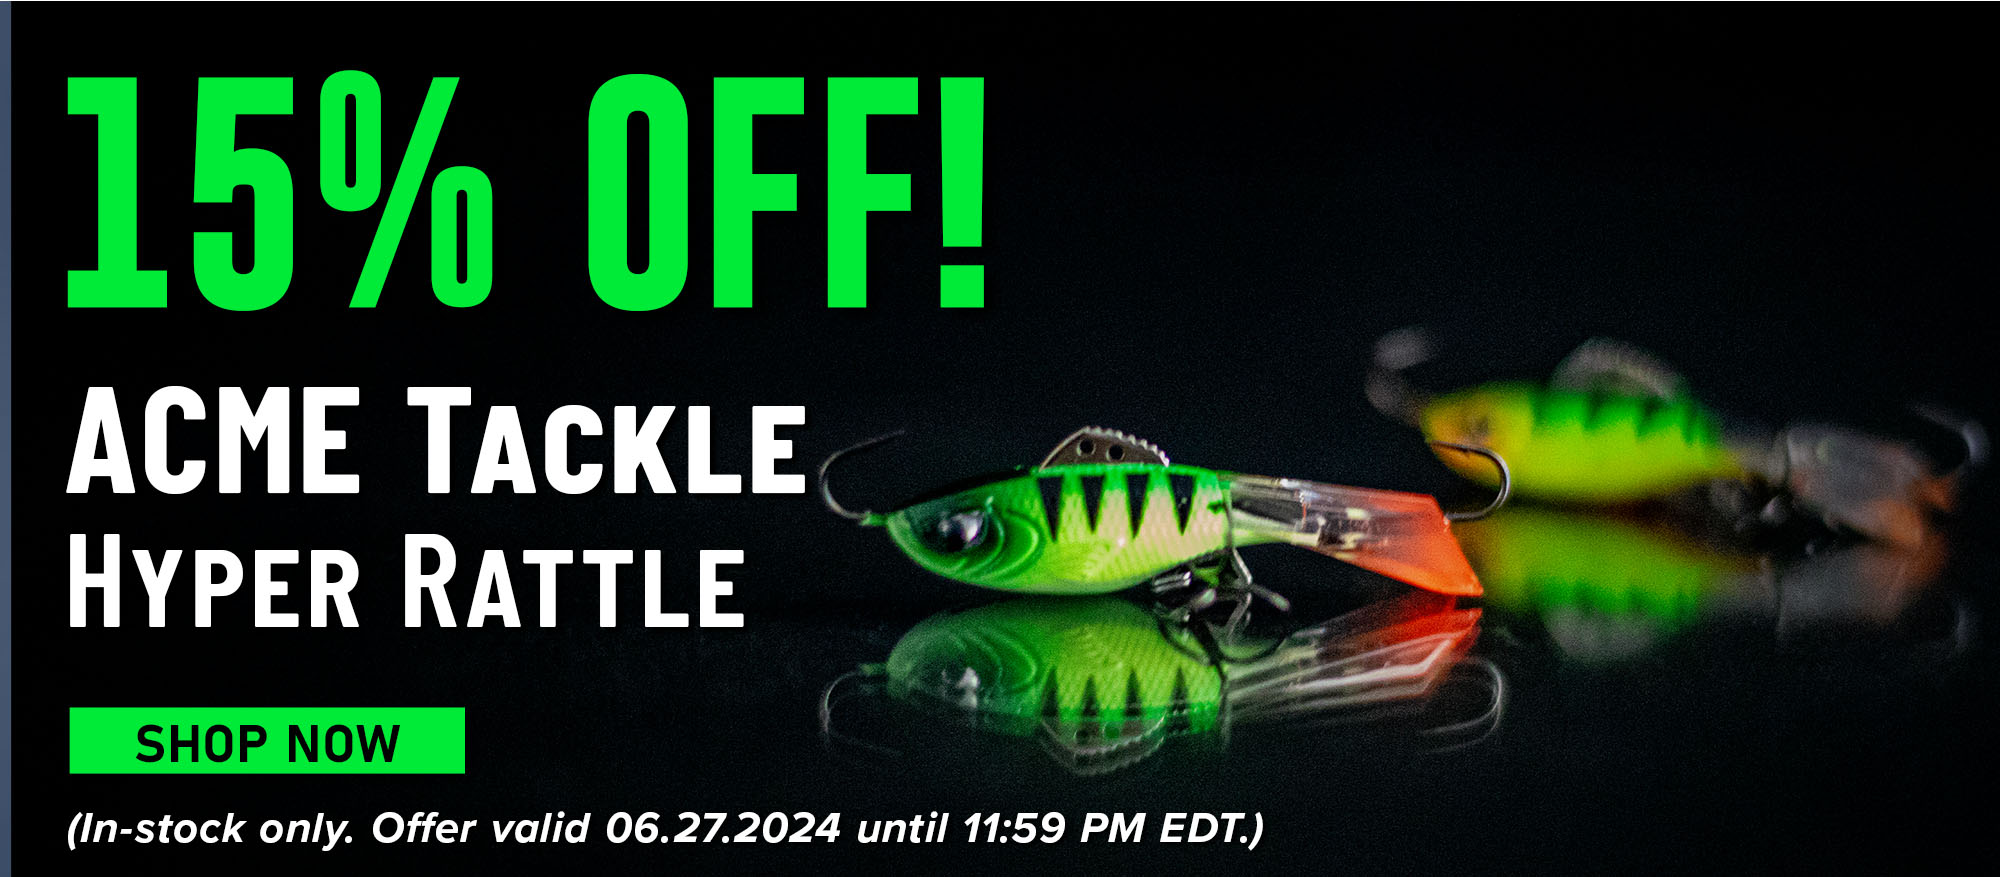 15% Off! ACME Tackle Hyper Rattle Shop Now (In-stock only. Offer valid 06.27.2024 until 11:59 PM EDT.)